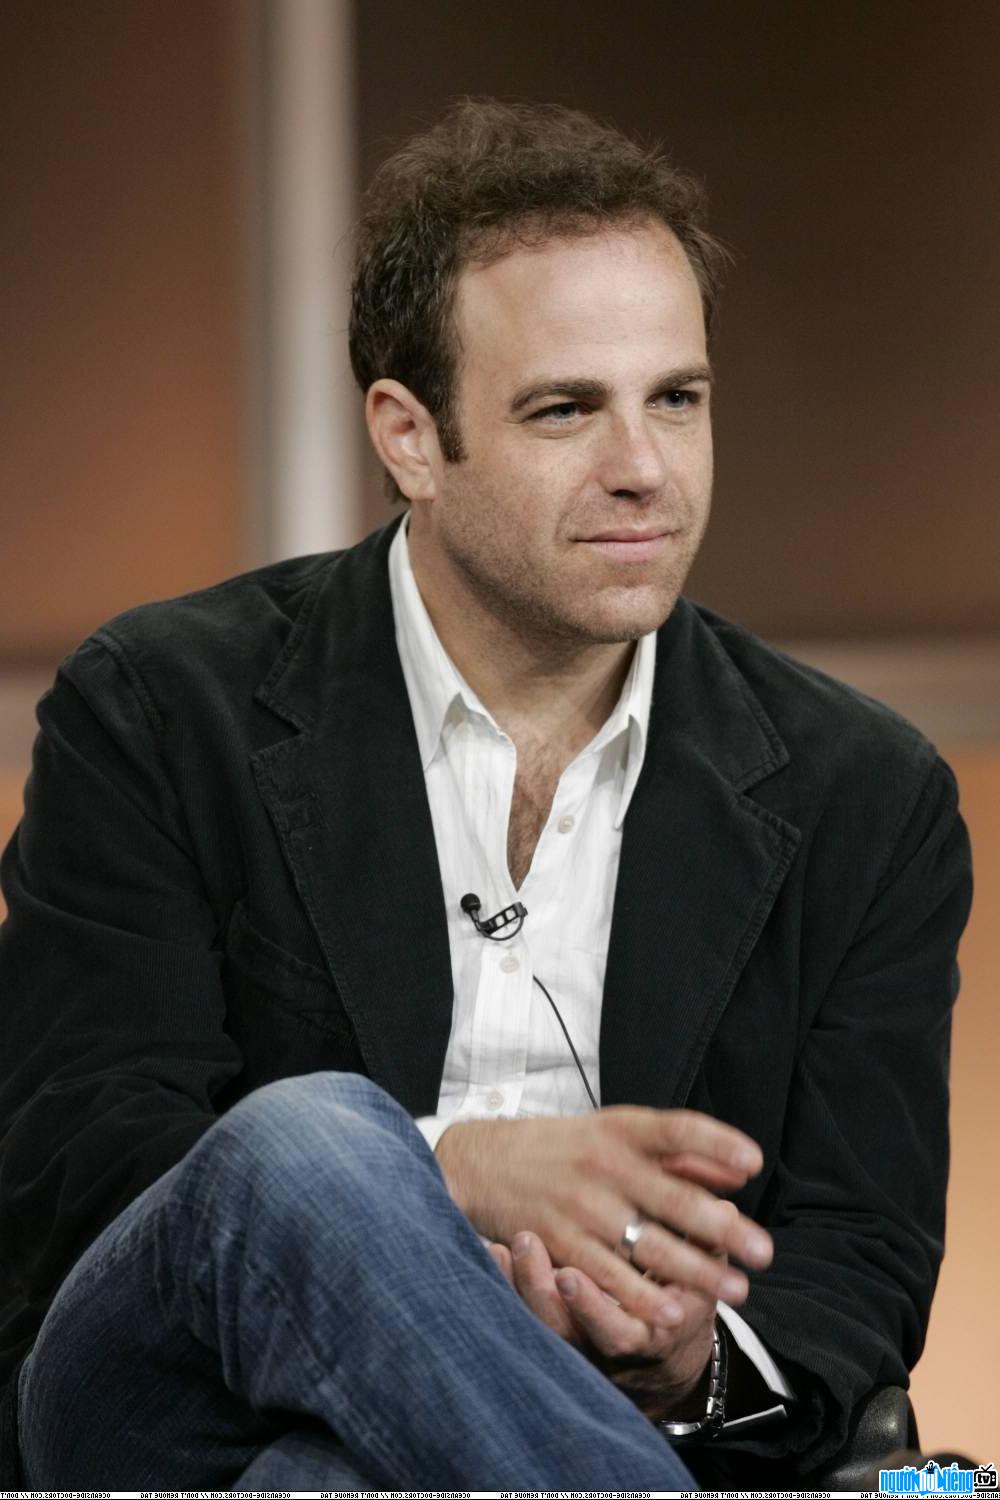 Another picture about actor Paul Adelstein